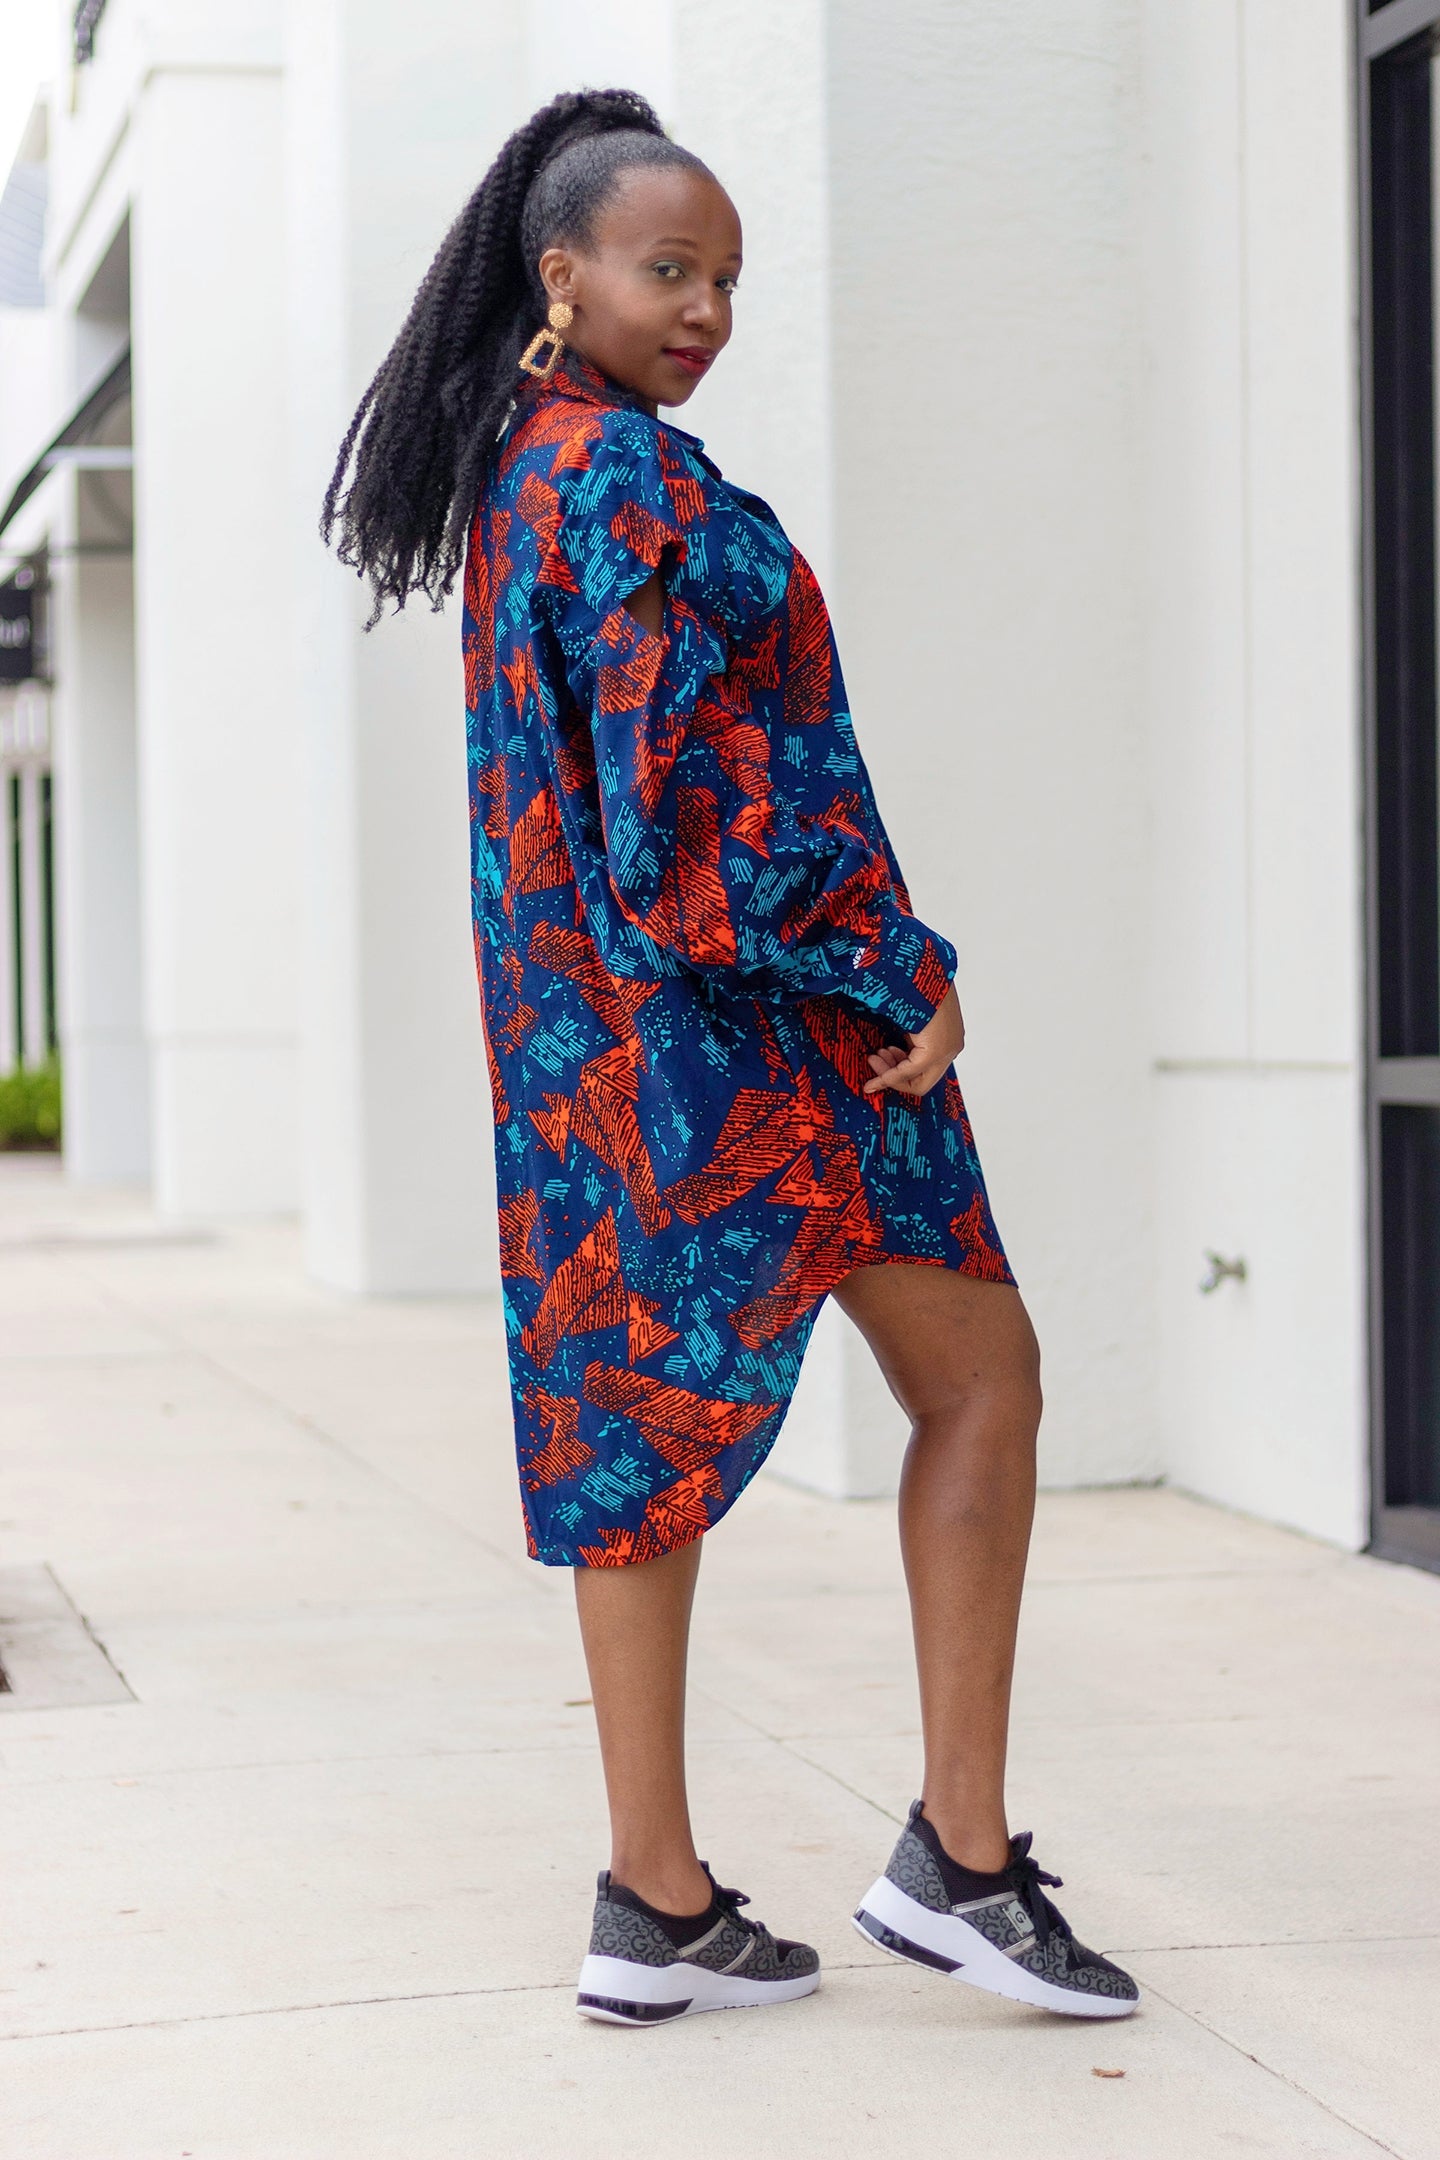 African Print/Ankara/Kitenge High-Low Oversized Shirt with Drop Sleeves and Pockets - Blue/Orange and Teal Abstract Print